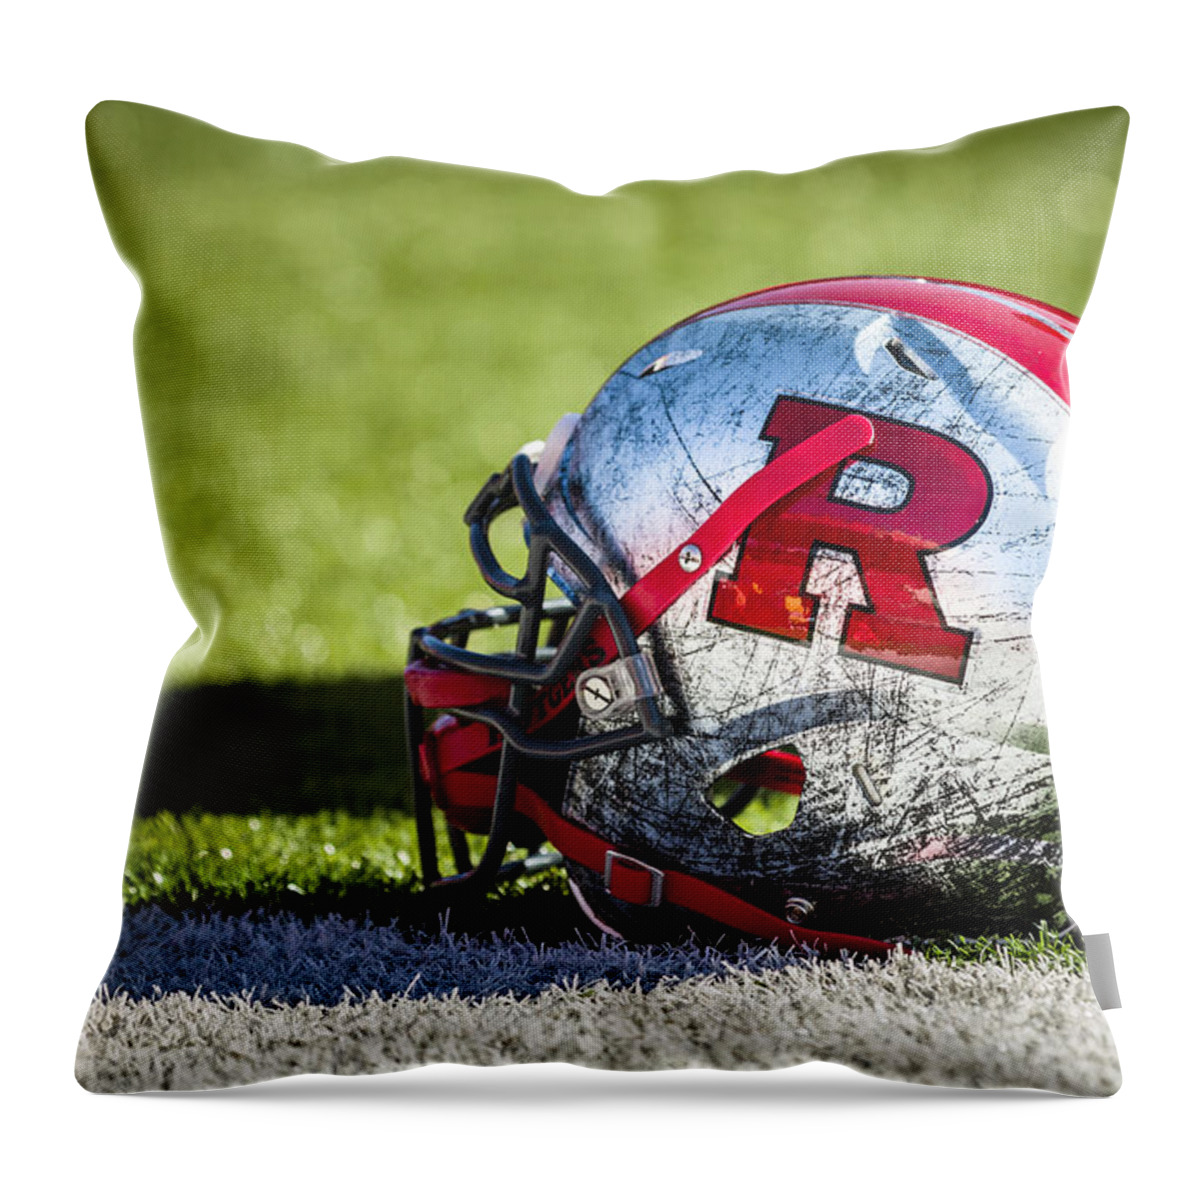 Anthony Milito Throw Pillow featuring the photograph Go Rutgers by Eduard Moldoveanu